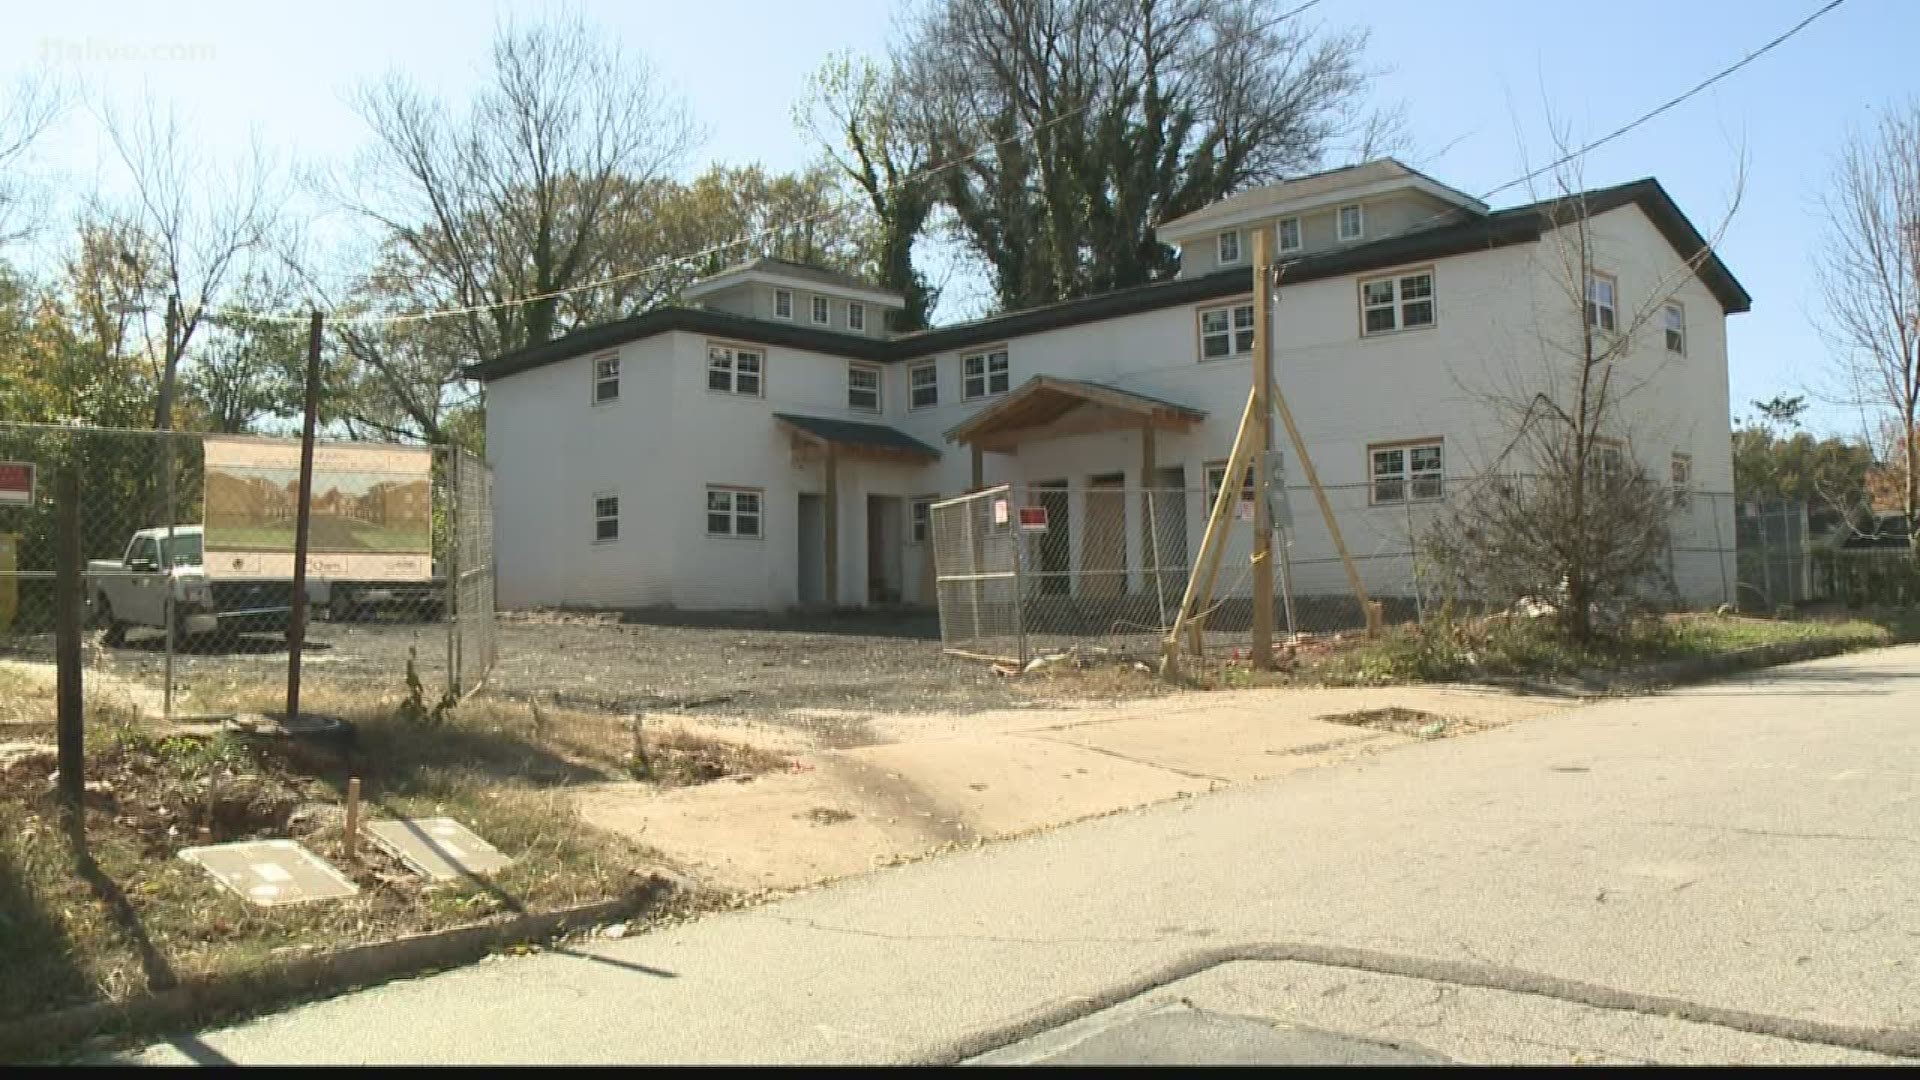 Much of the money is going toward permanent housing for folks currently living on the street.